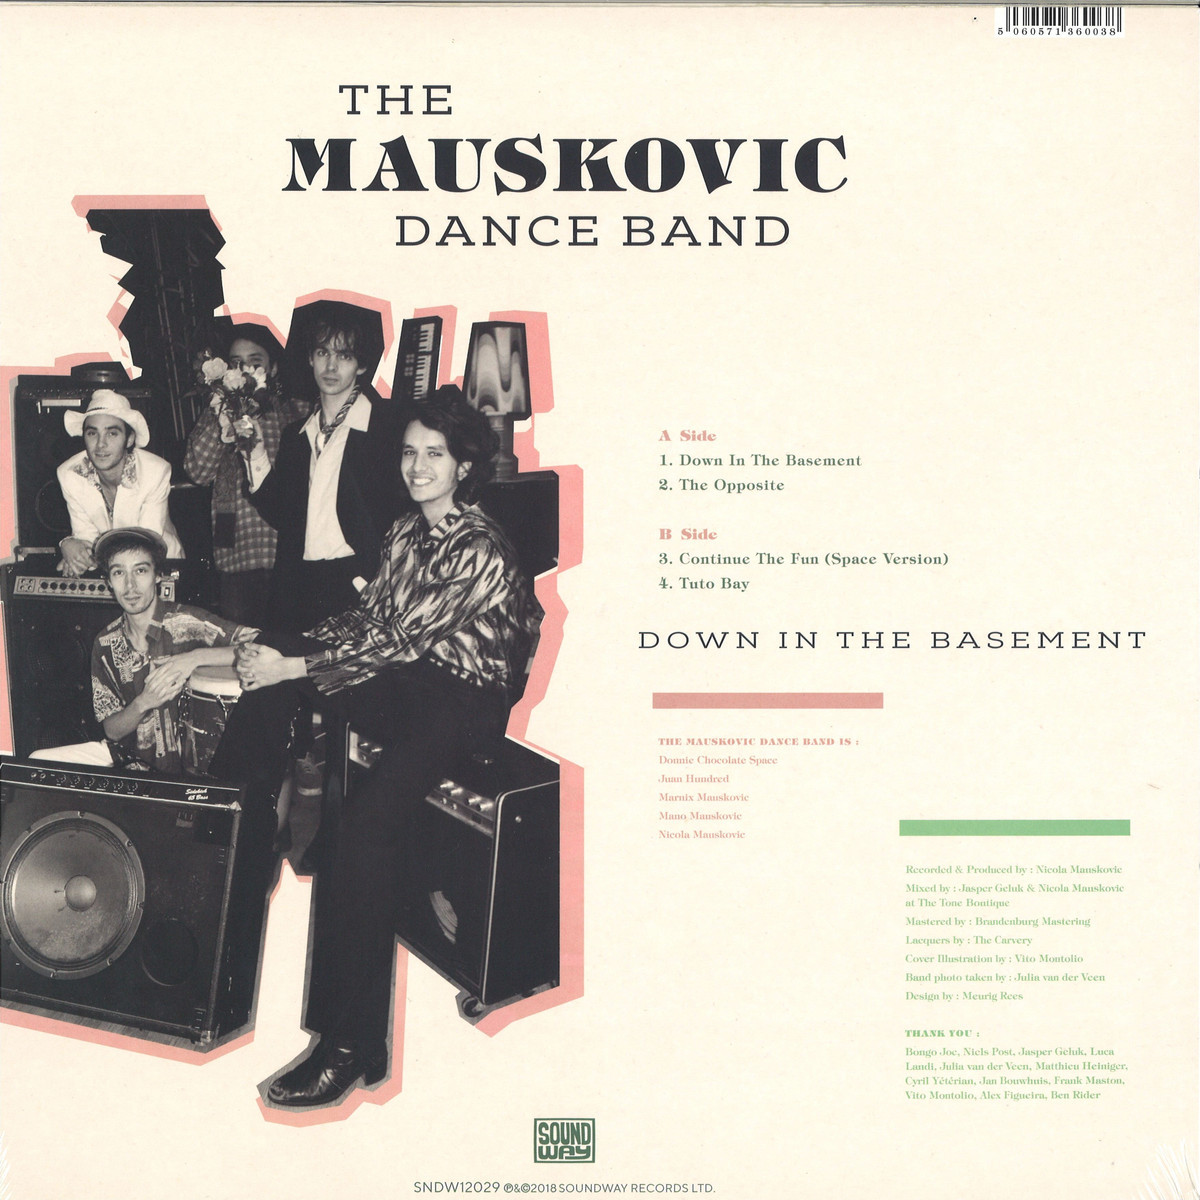 THE MAUSKOVICH DANCE BAND - Down In The Basement EP / SOUNDWAY RECORDS  156706 / 156706 - Vinyl